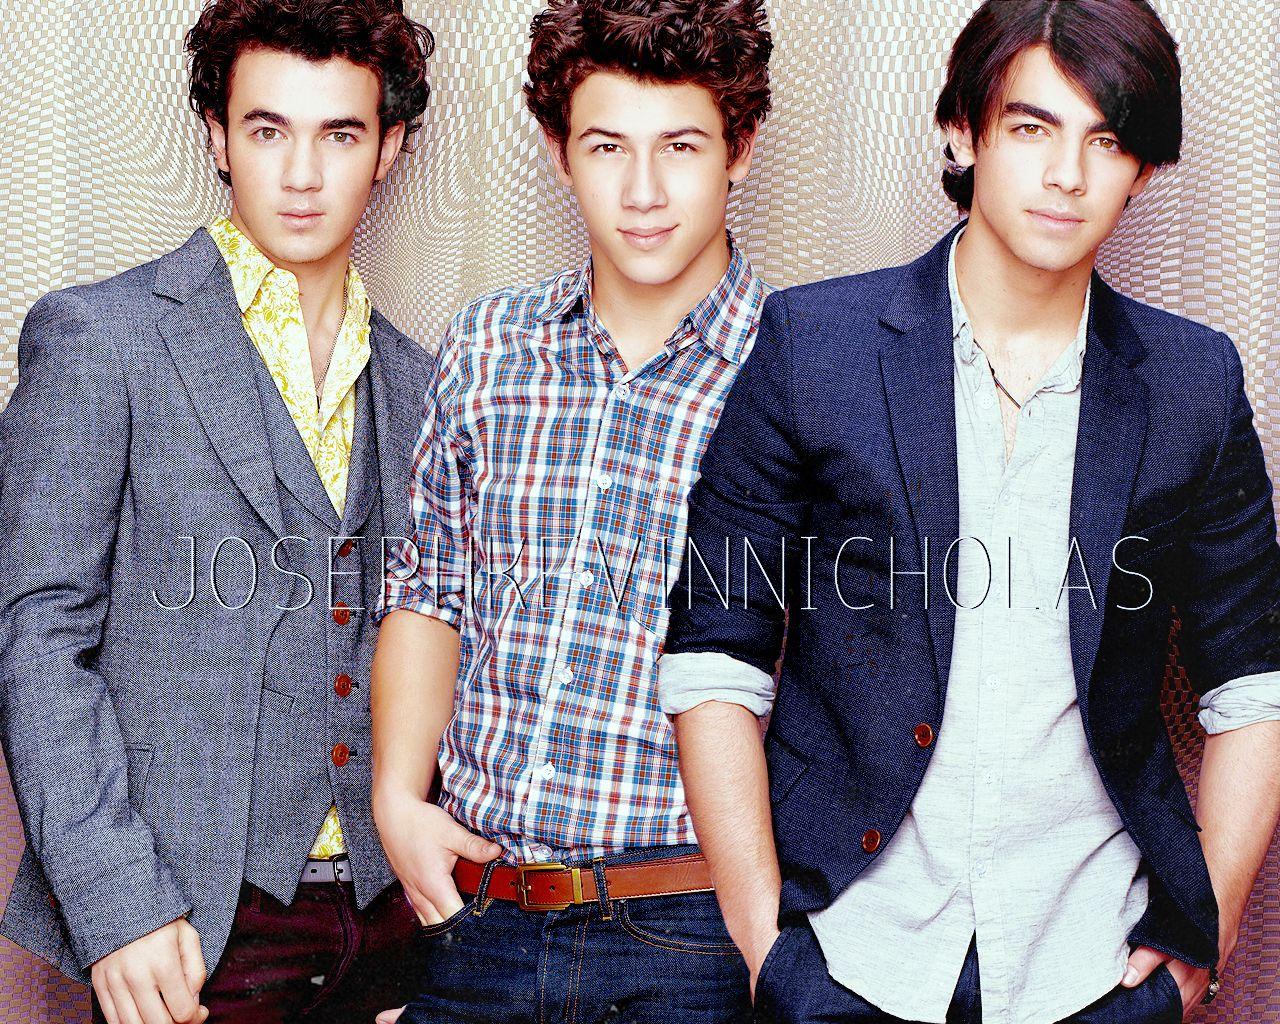 post the best pic of the jonas brothdr together Brothers